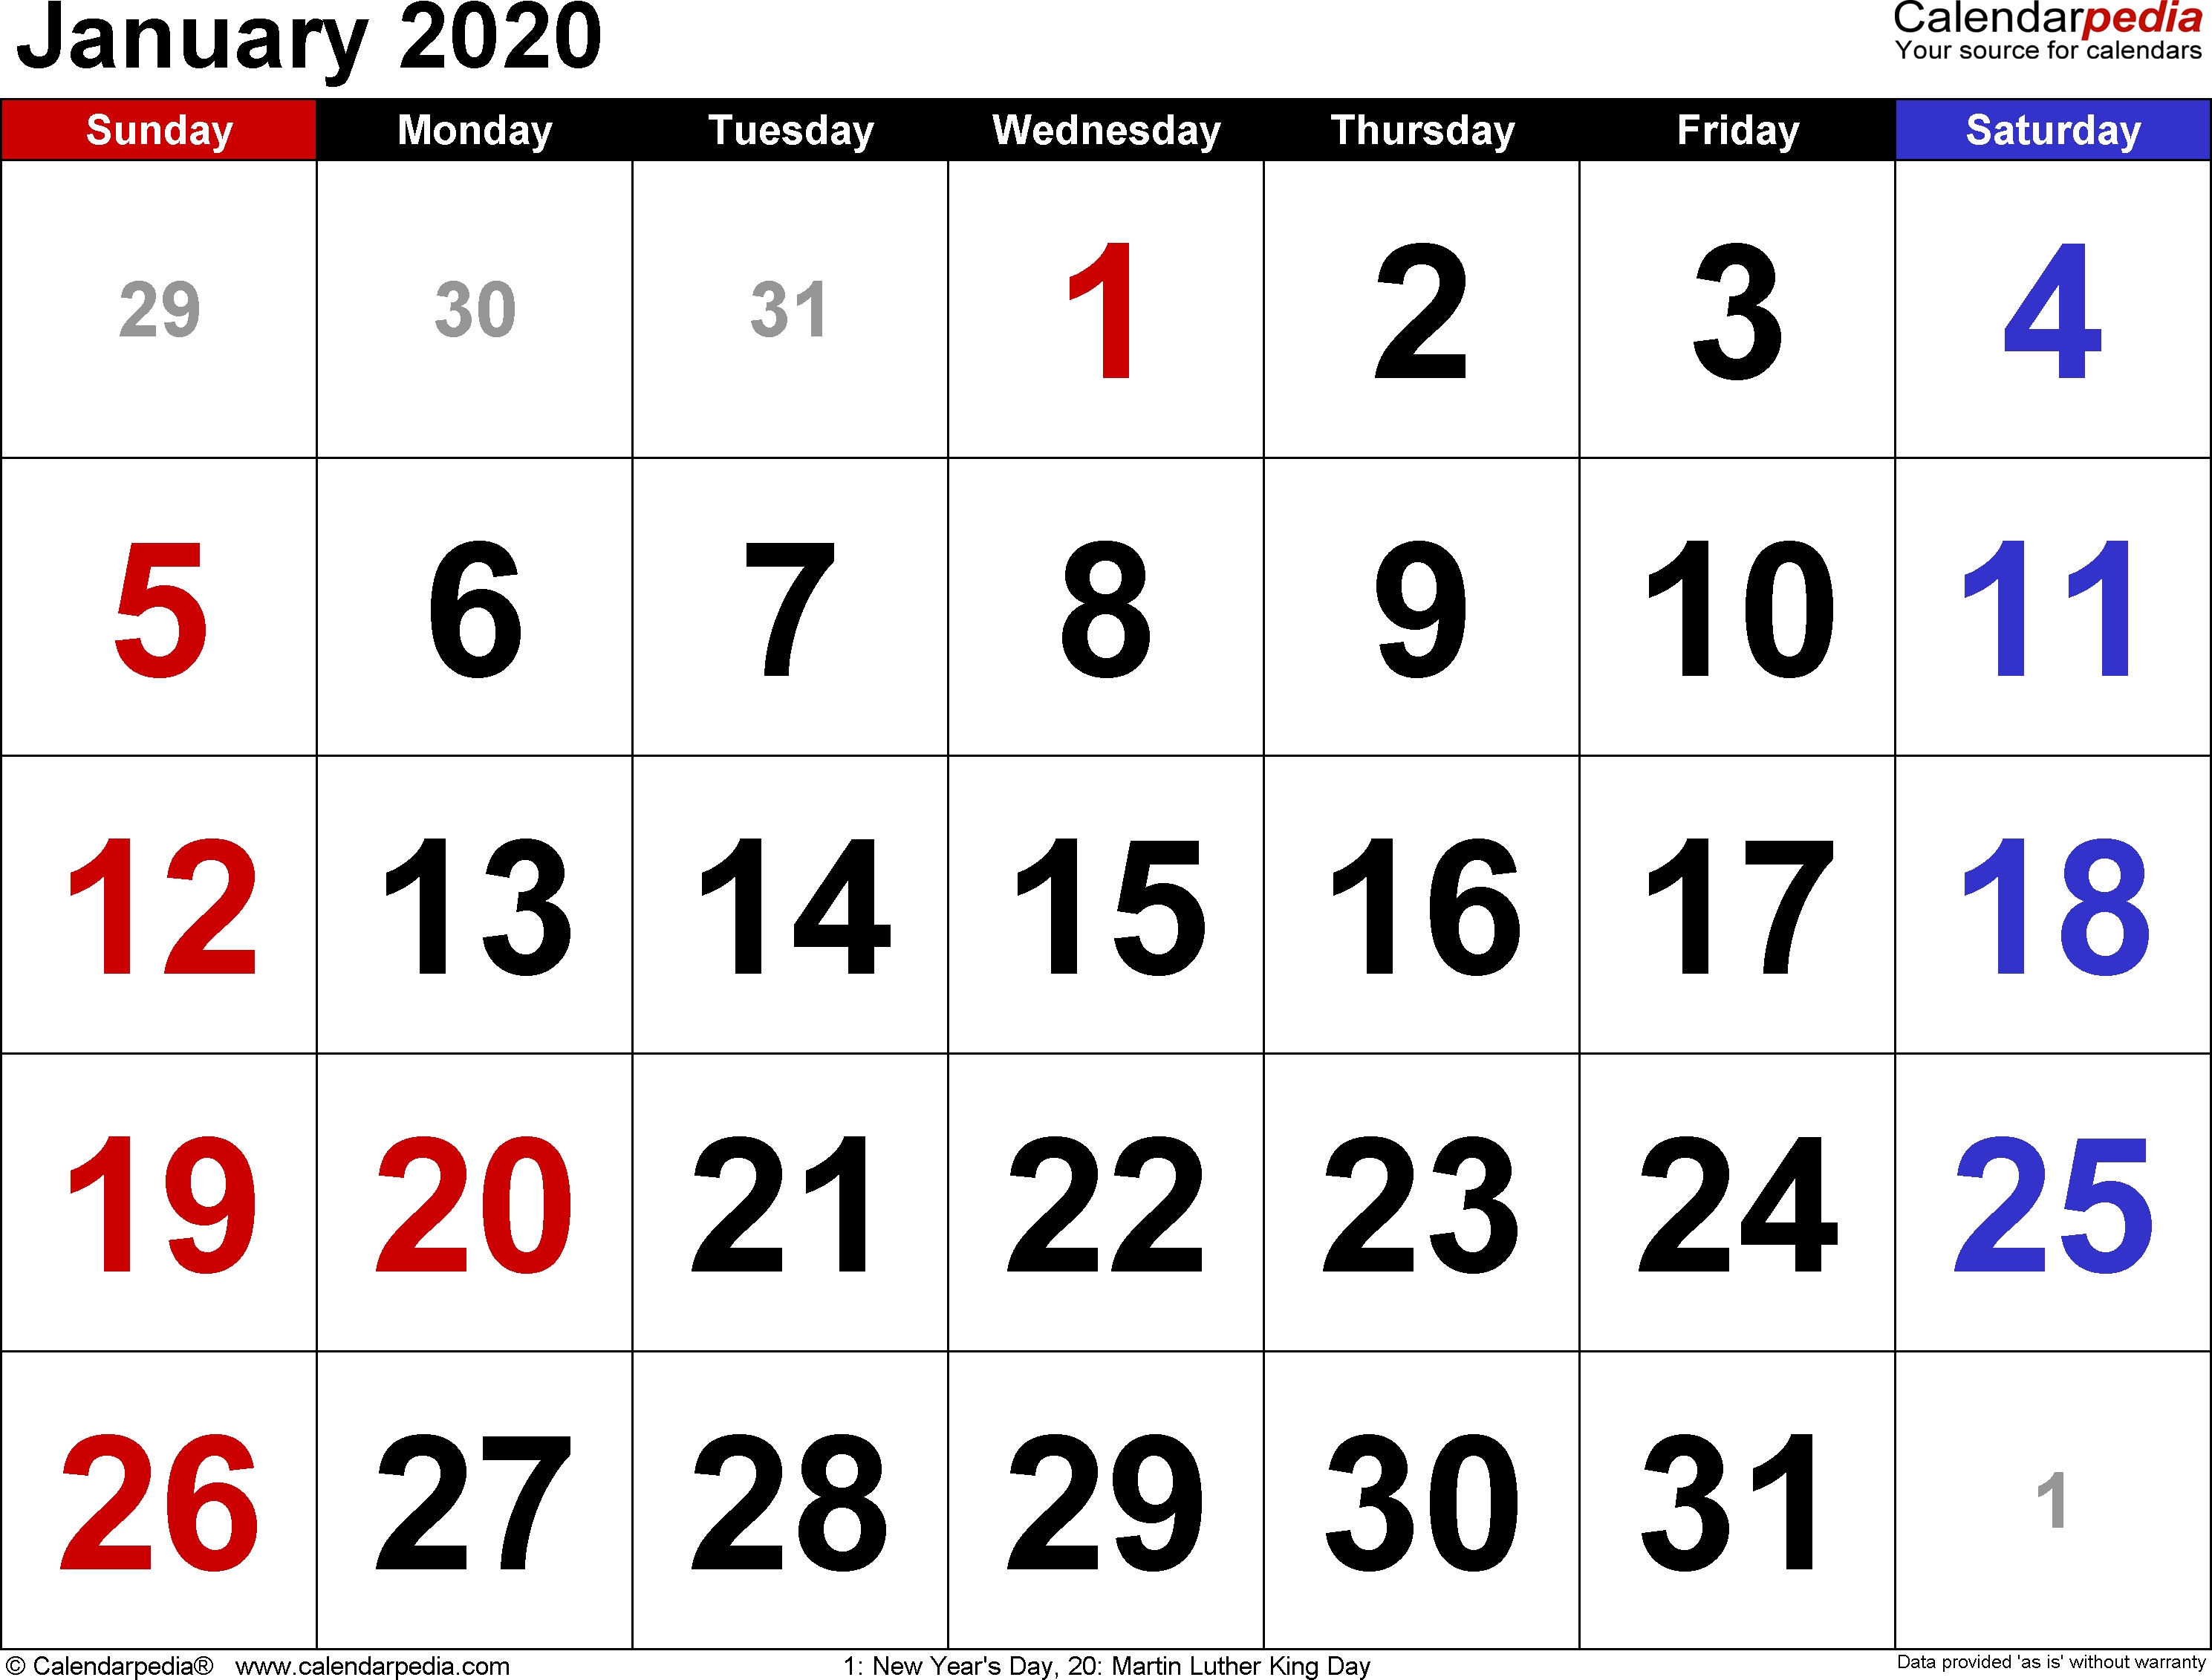 January 2020 Calendars For Word, Excel &amp; Pdf-January 2020 Calendar Png